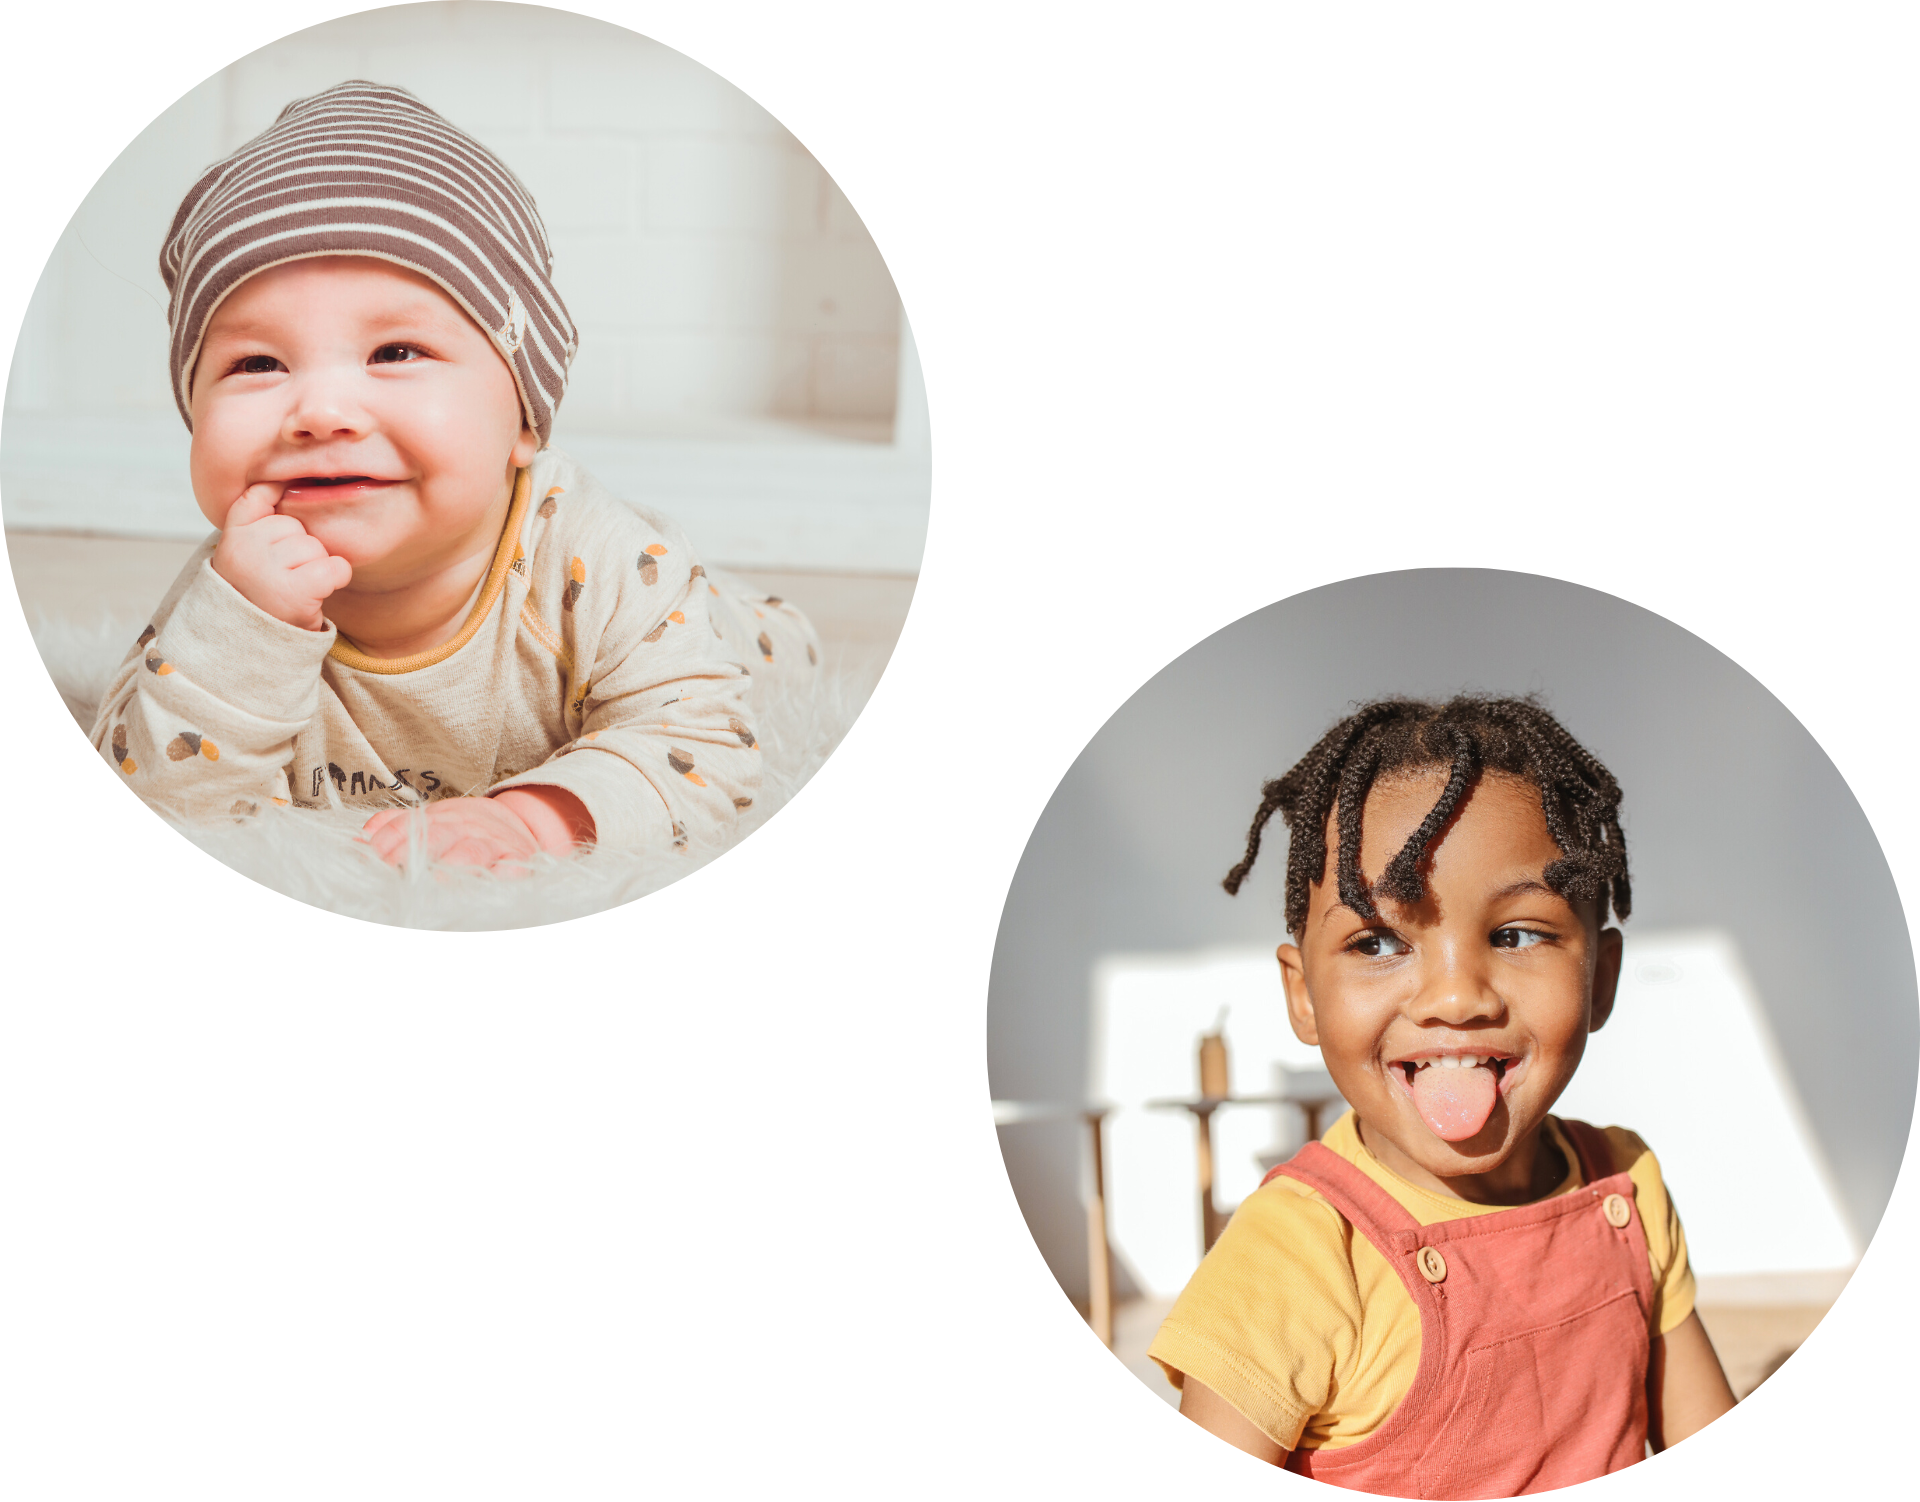 Two circular images of a baby wearing a striped hat and a child with a playful face in a nursery